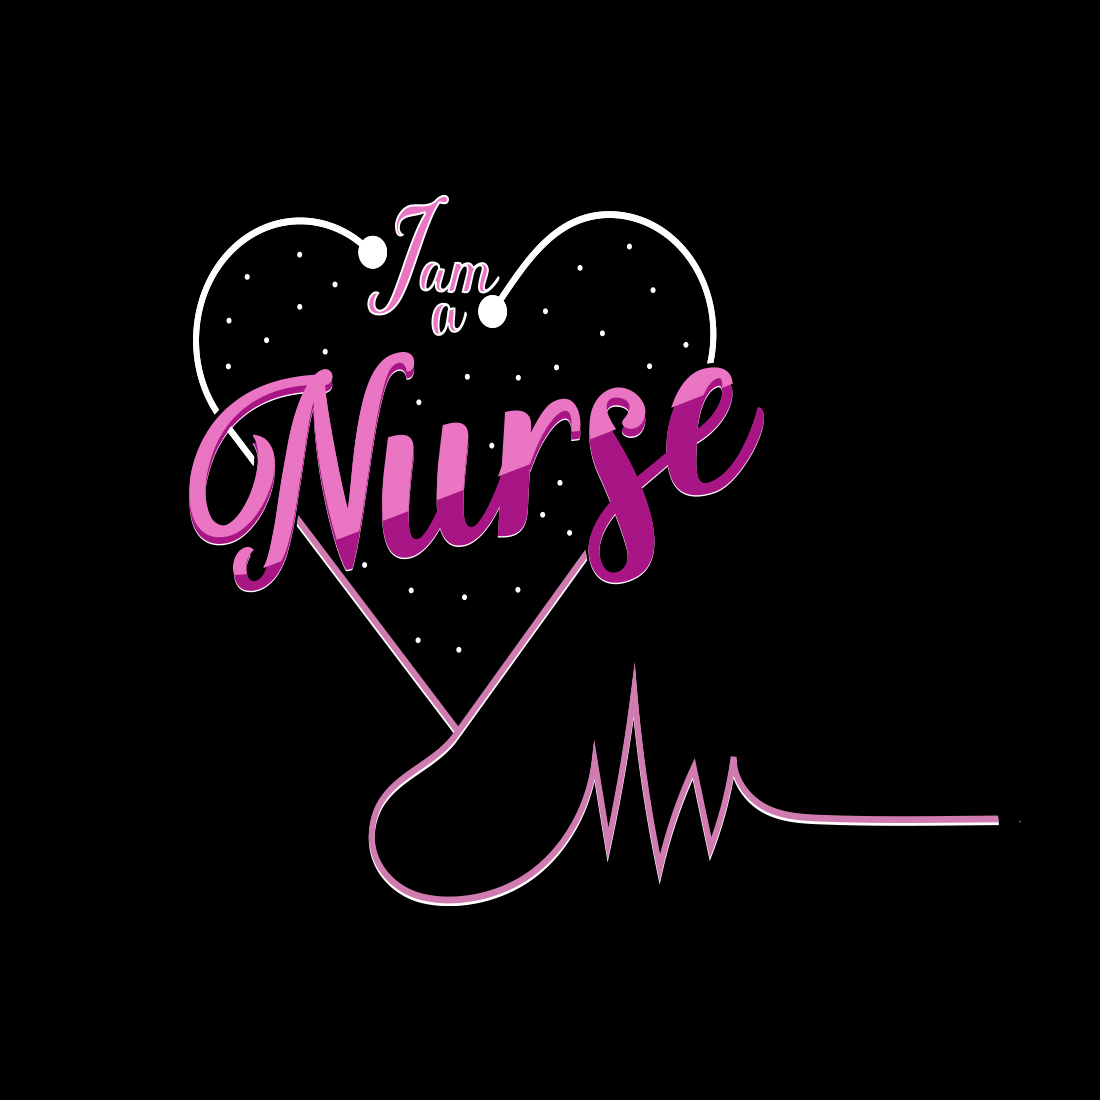 Beautiful image for prints on the theme of a nurse